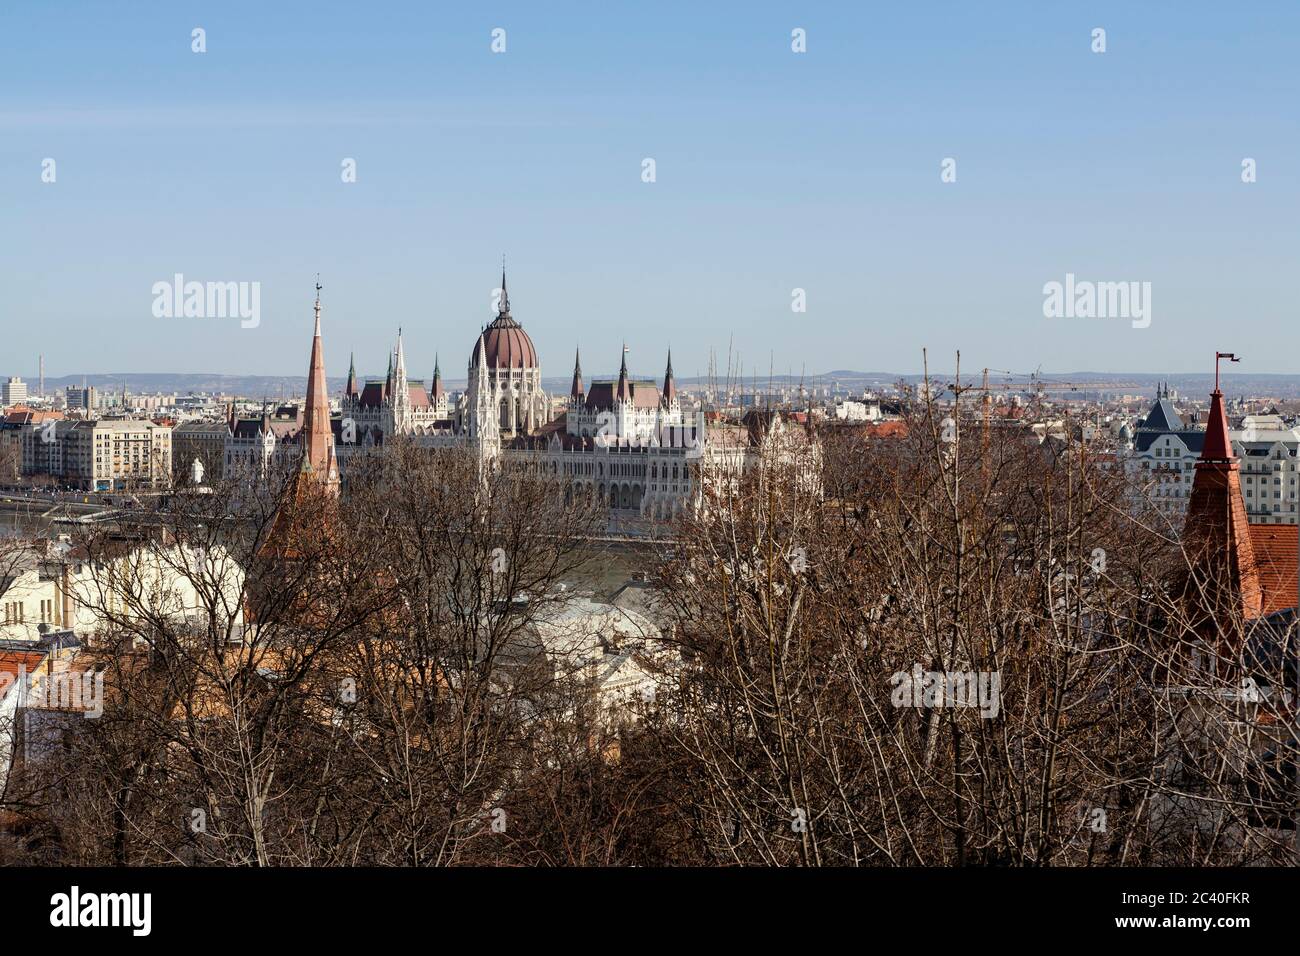 View across the Danube from Víziváros in Buda to Pest on the opposite bank, with the Parliament building prominent: Budapest, Hungary Stock Photo